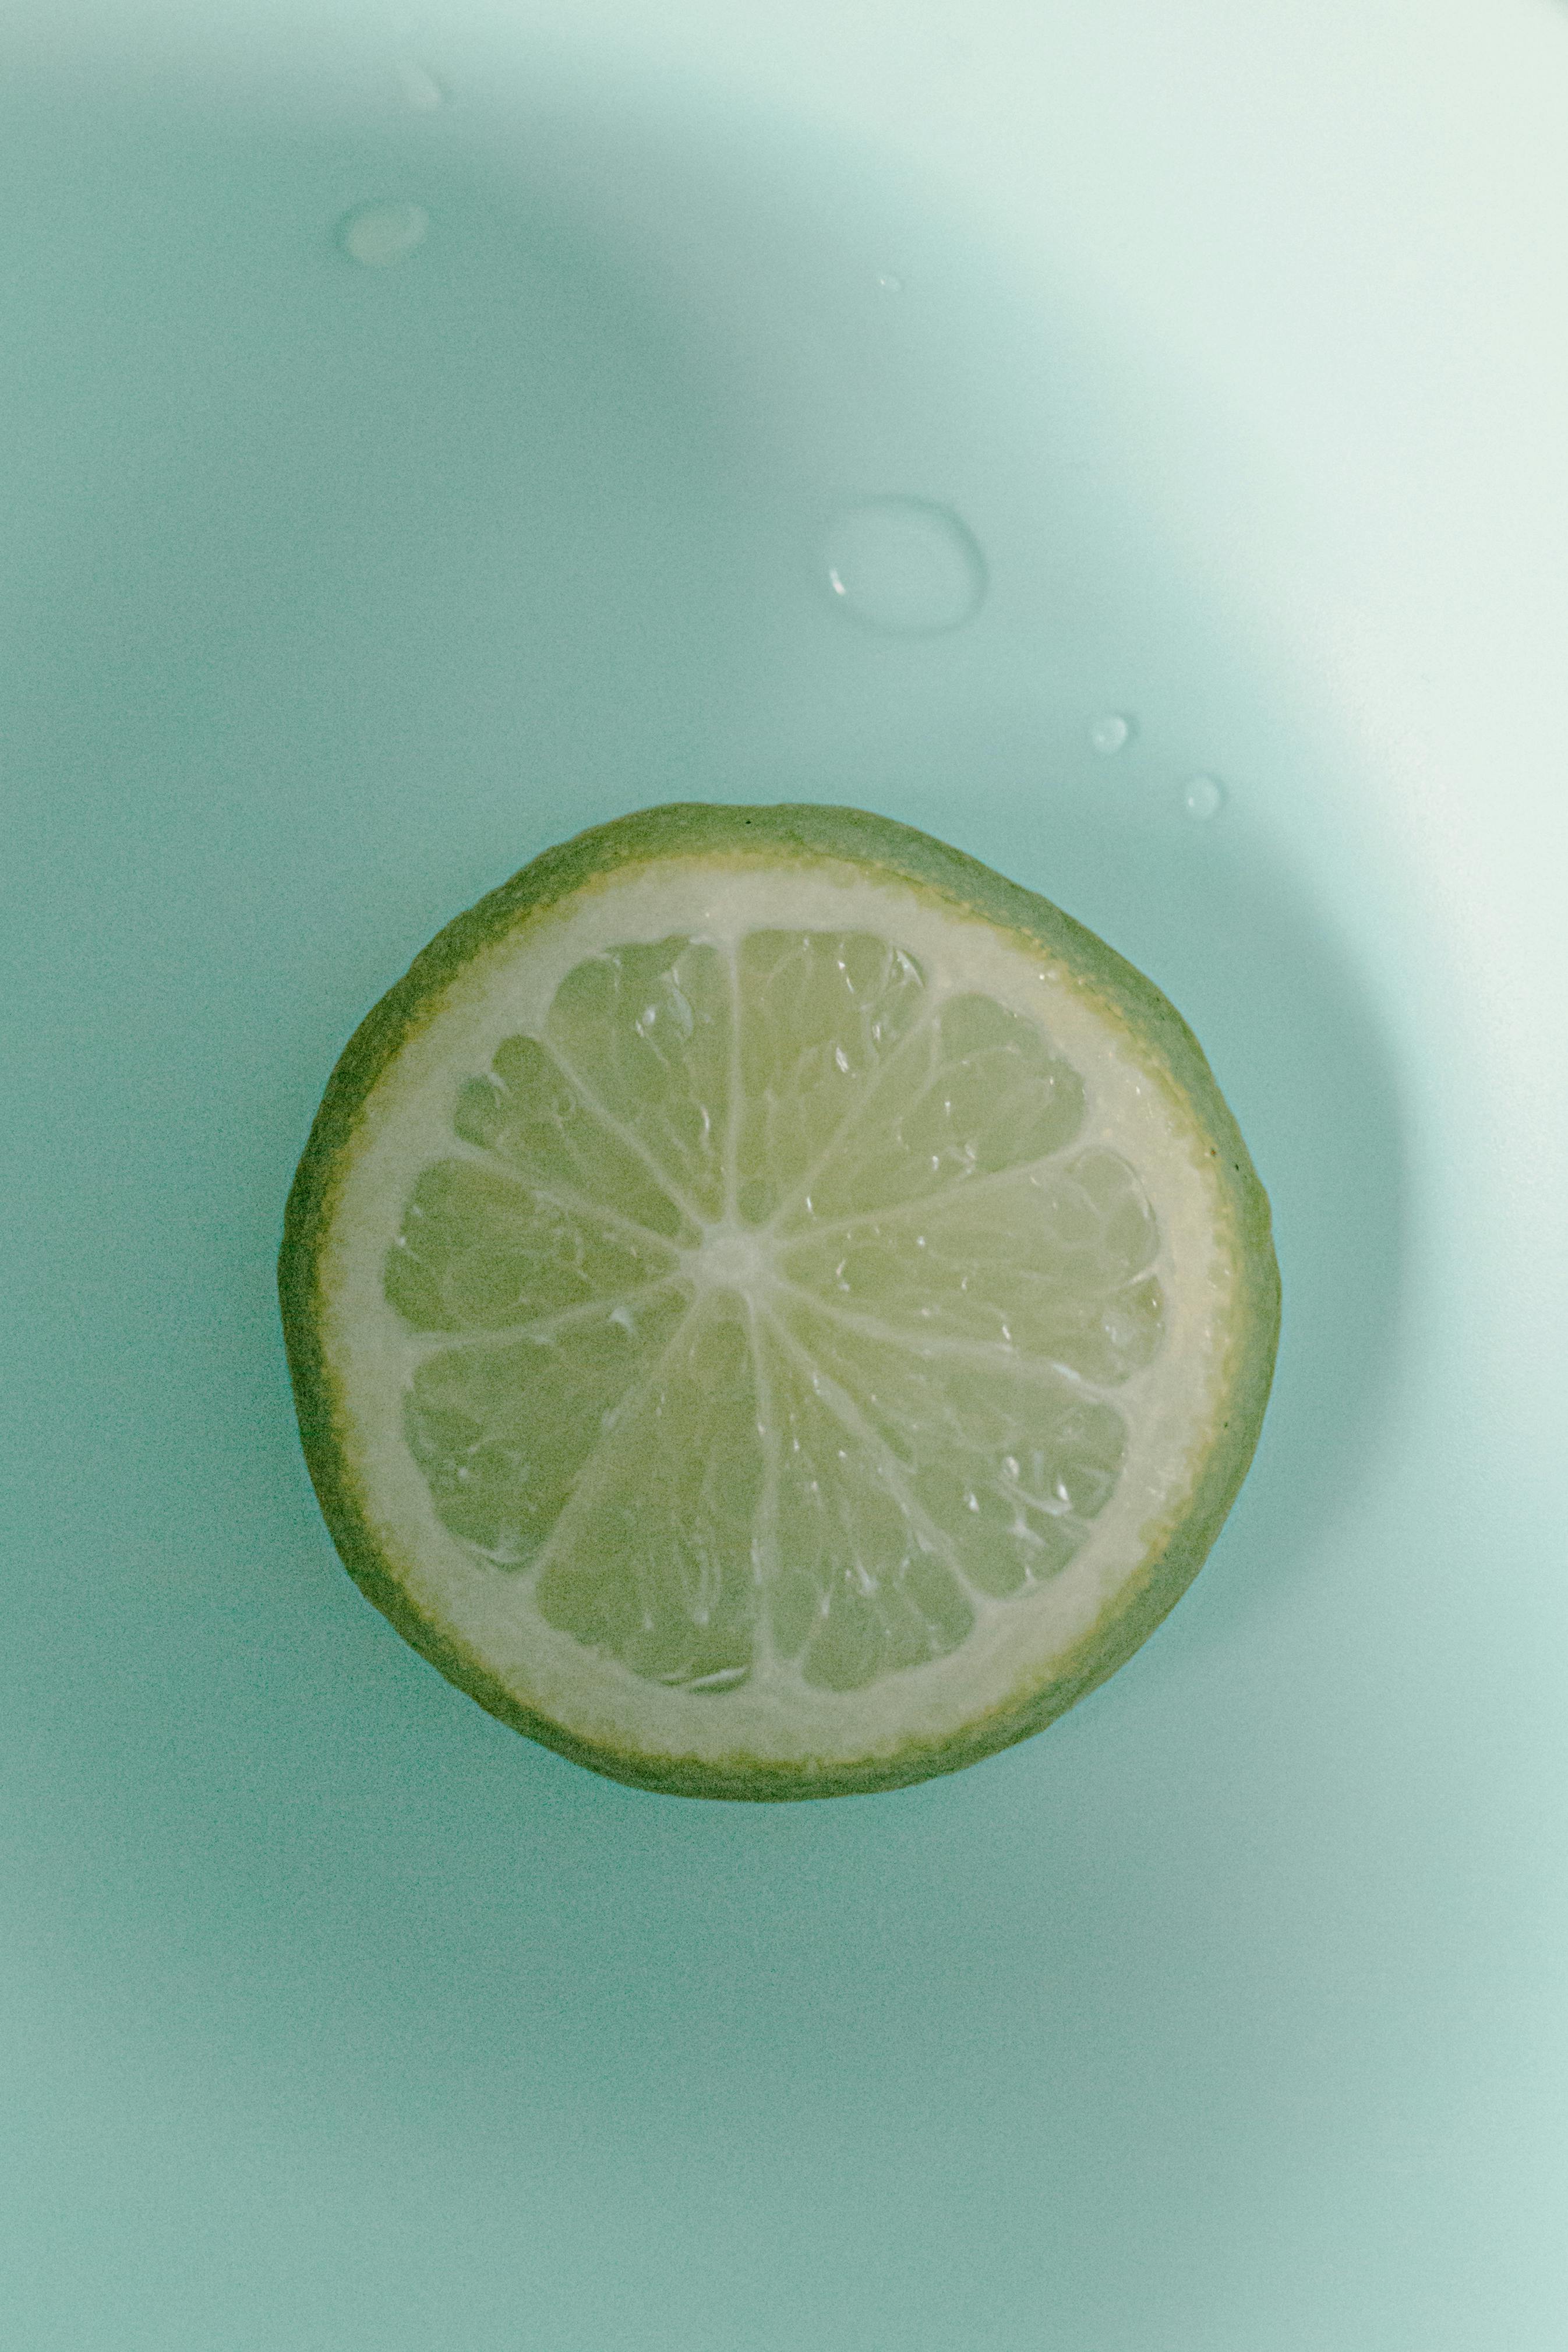 juicy lime slice placed in bowl